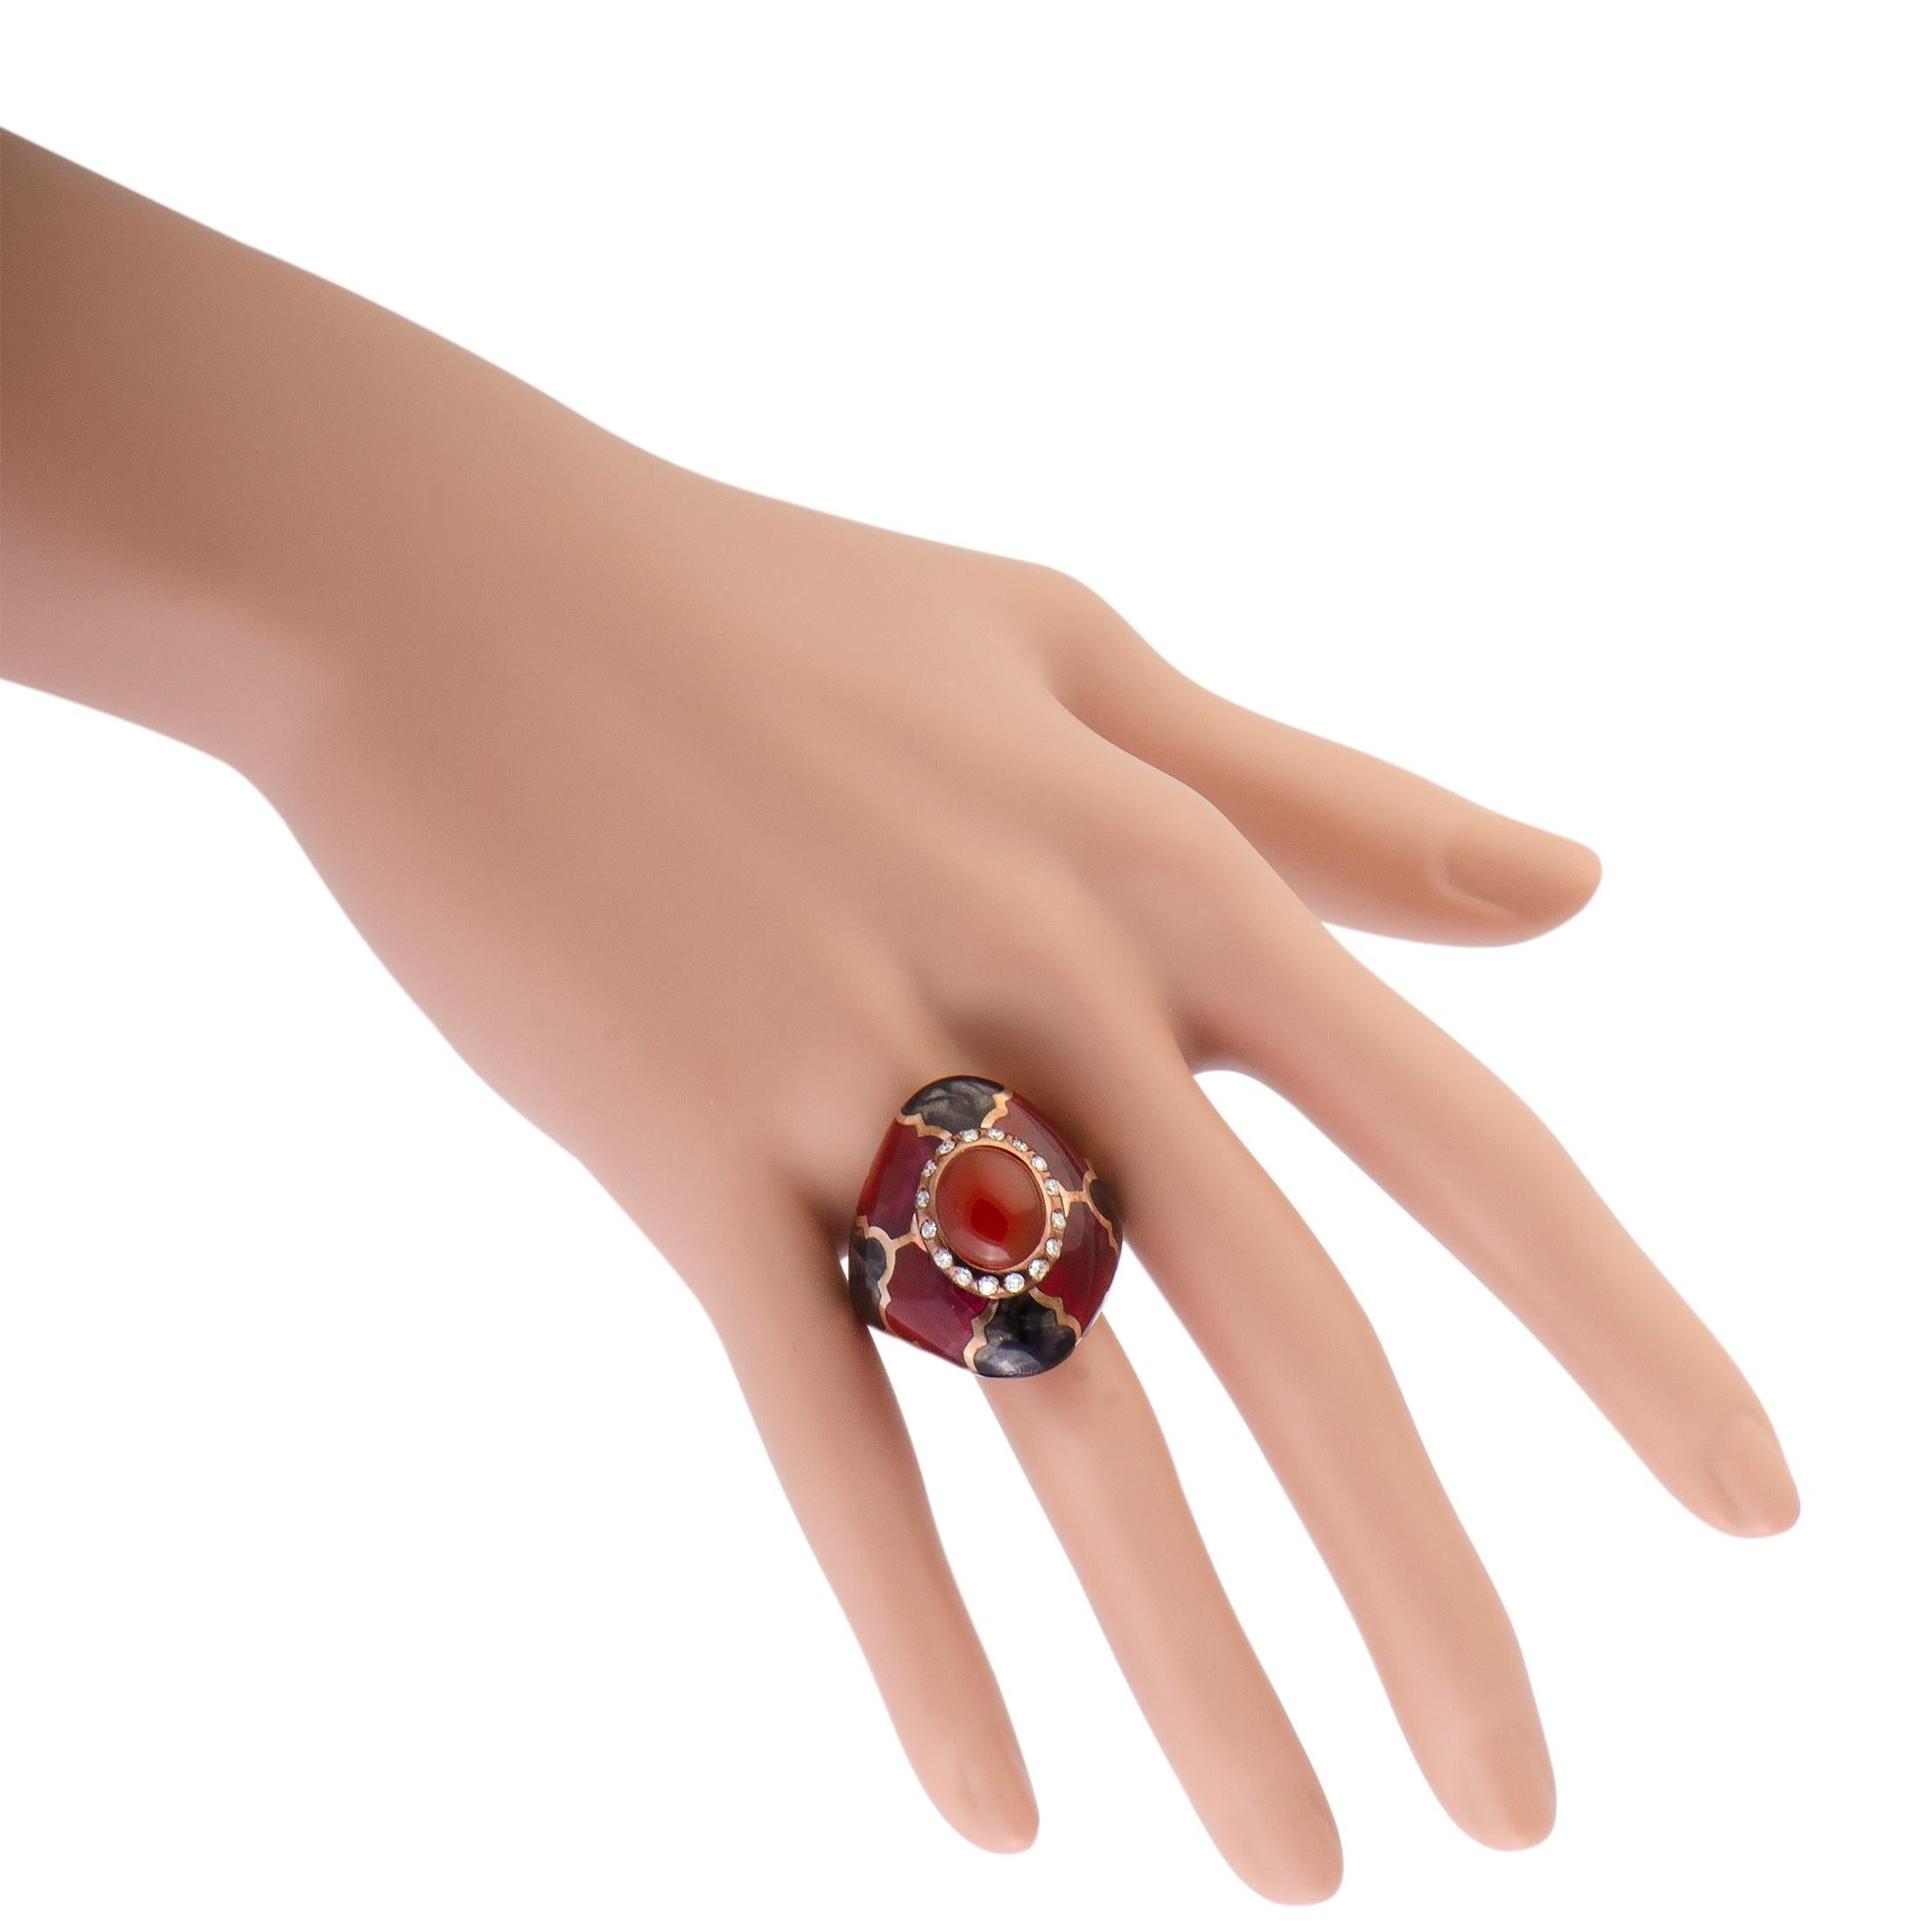 Add a compellingly passionate touch to your ensembles with this captivating jewelry piece that boasts bold design topped off with fashionable décor. Presented by Nouvelle Bague, this ring is expertly crafted from 18K rose gold and sterling silver,